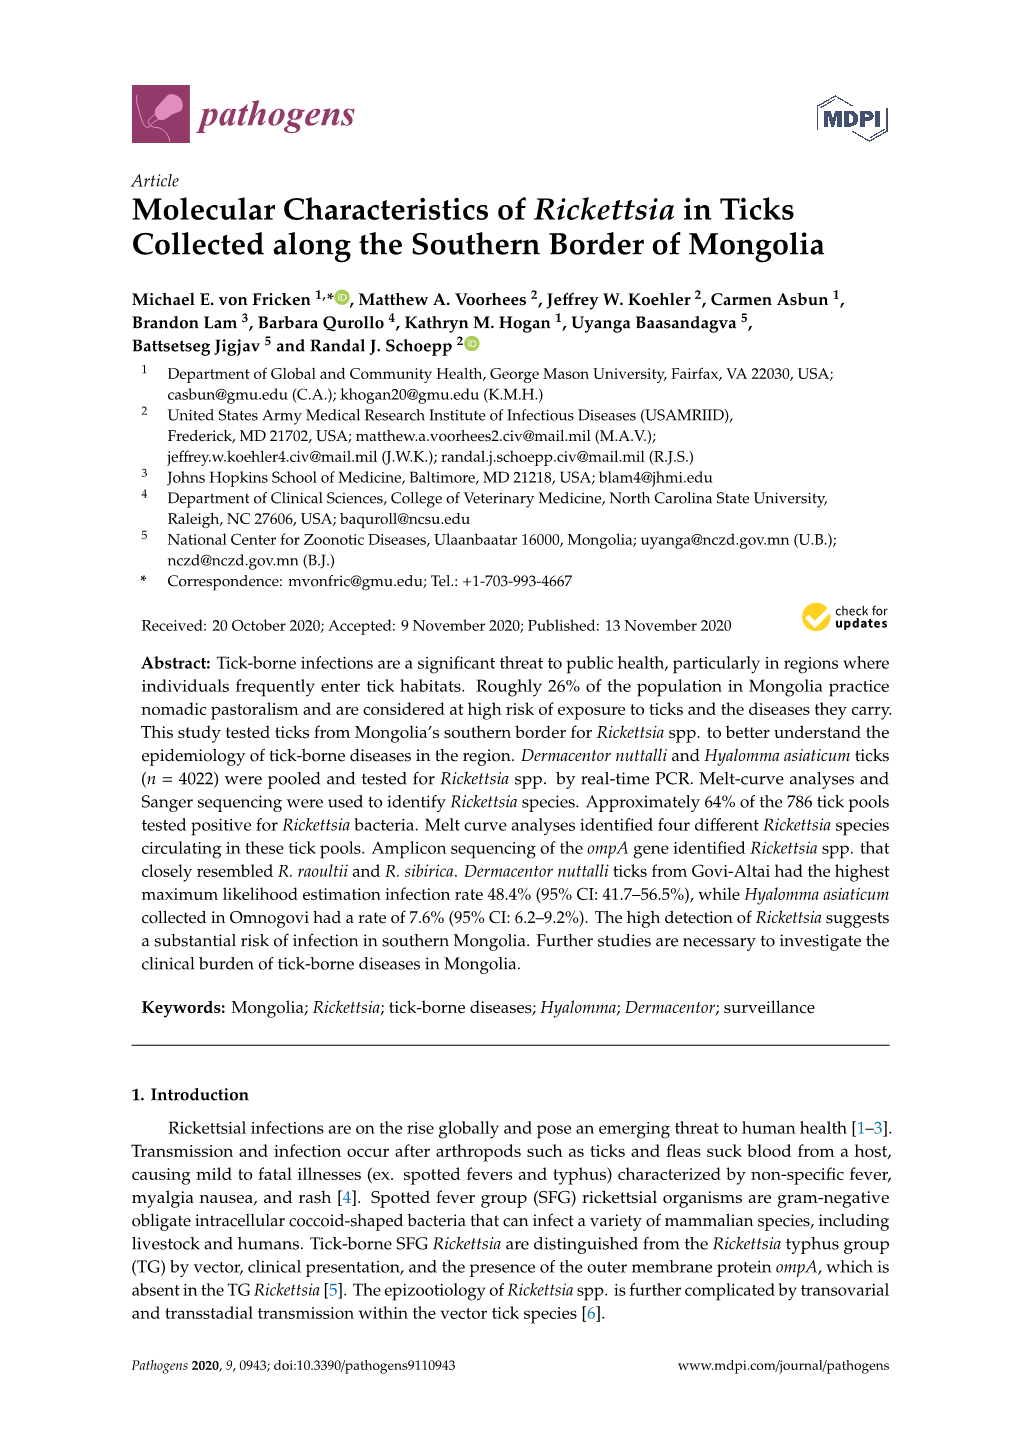 Molecular Characteristics of Rickettsia in Ticks Collected Along the Southern Border of Mongolia